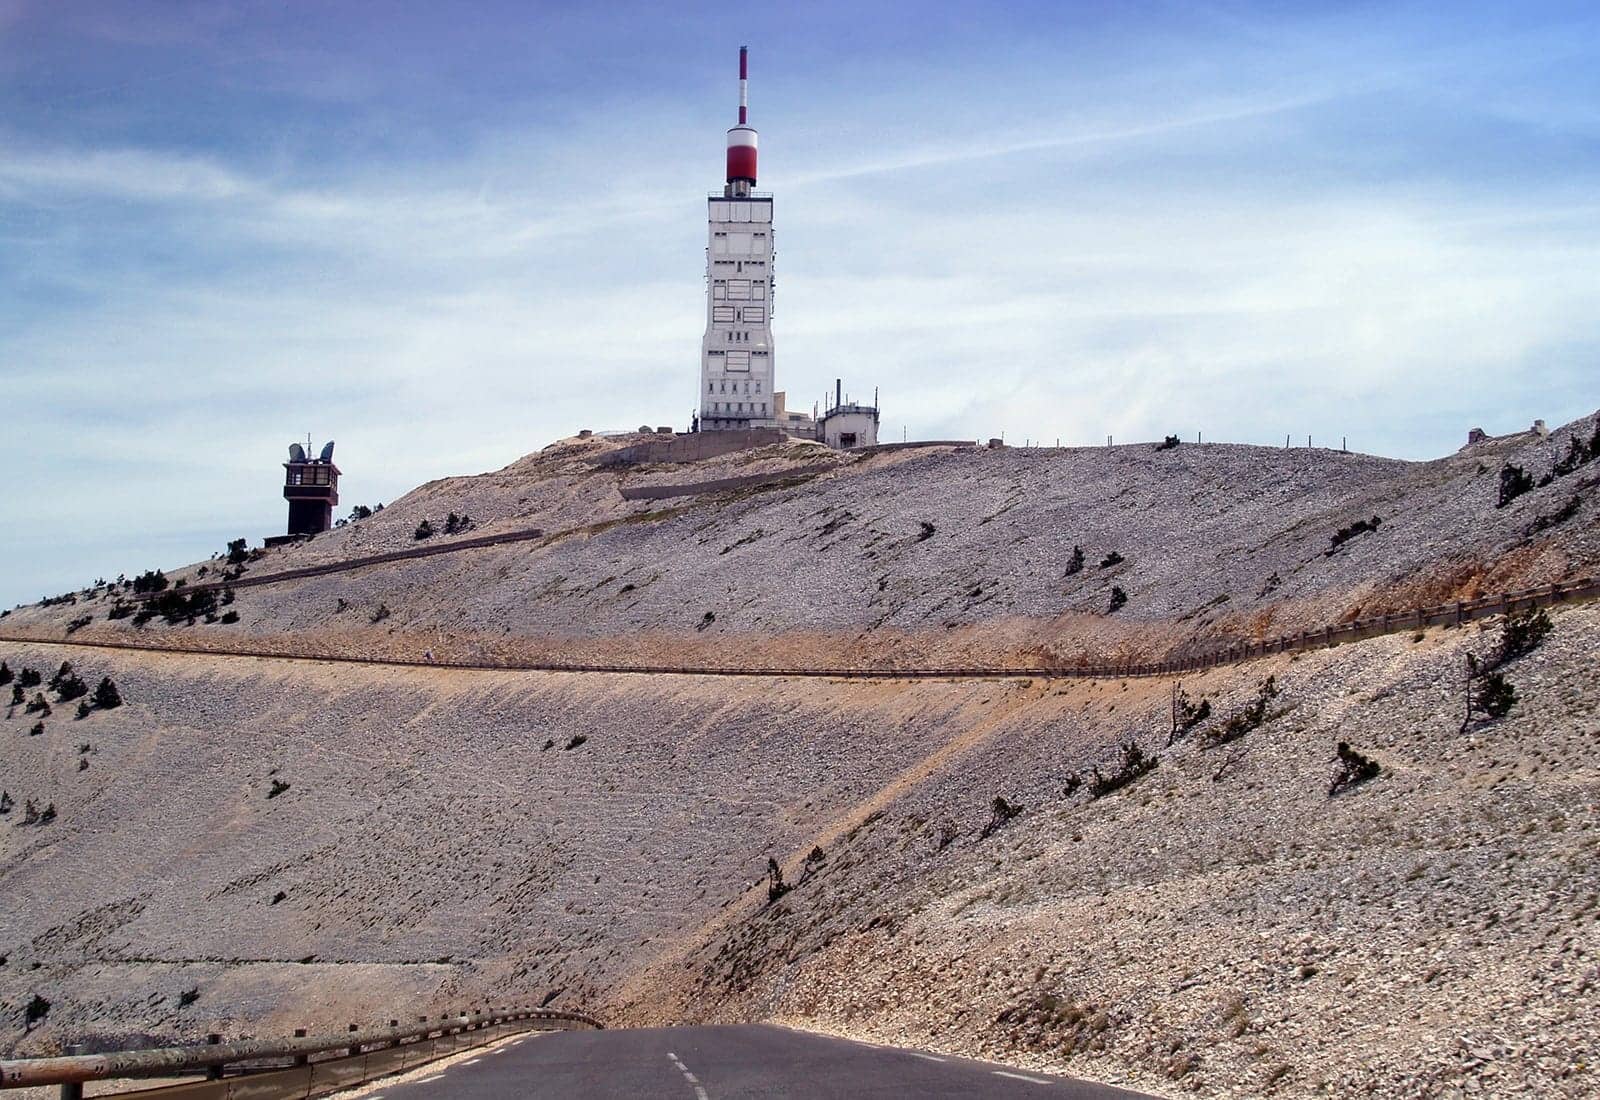 Summit area of Mont Ventoux in the Provence Region of France.